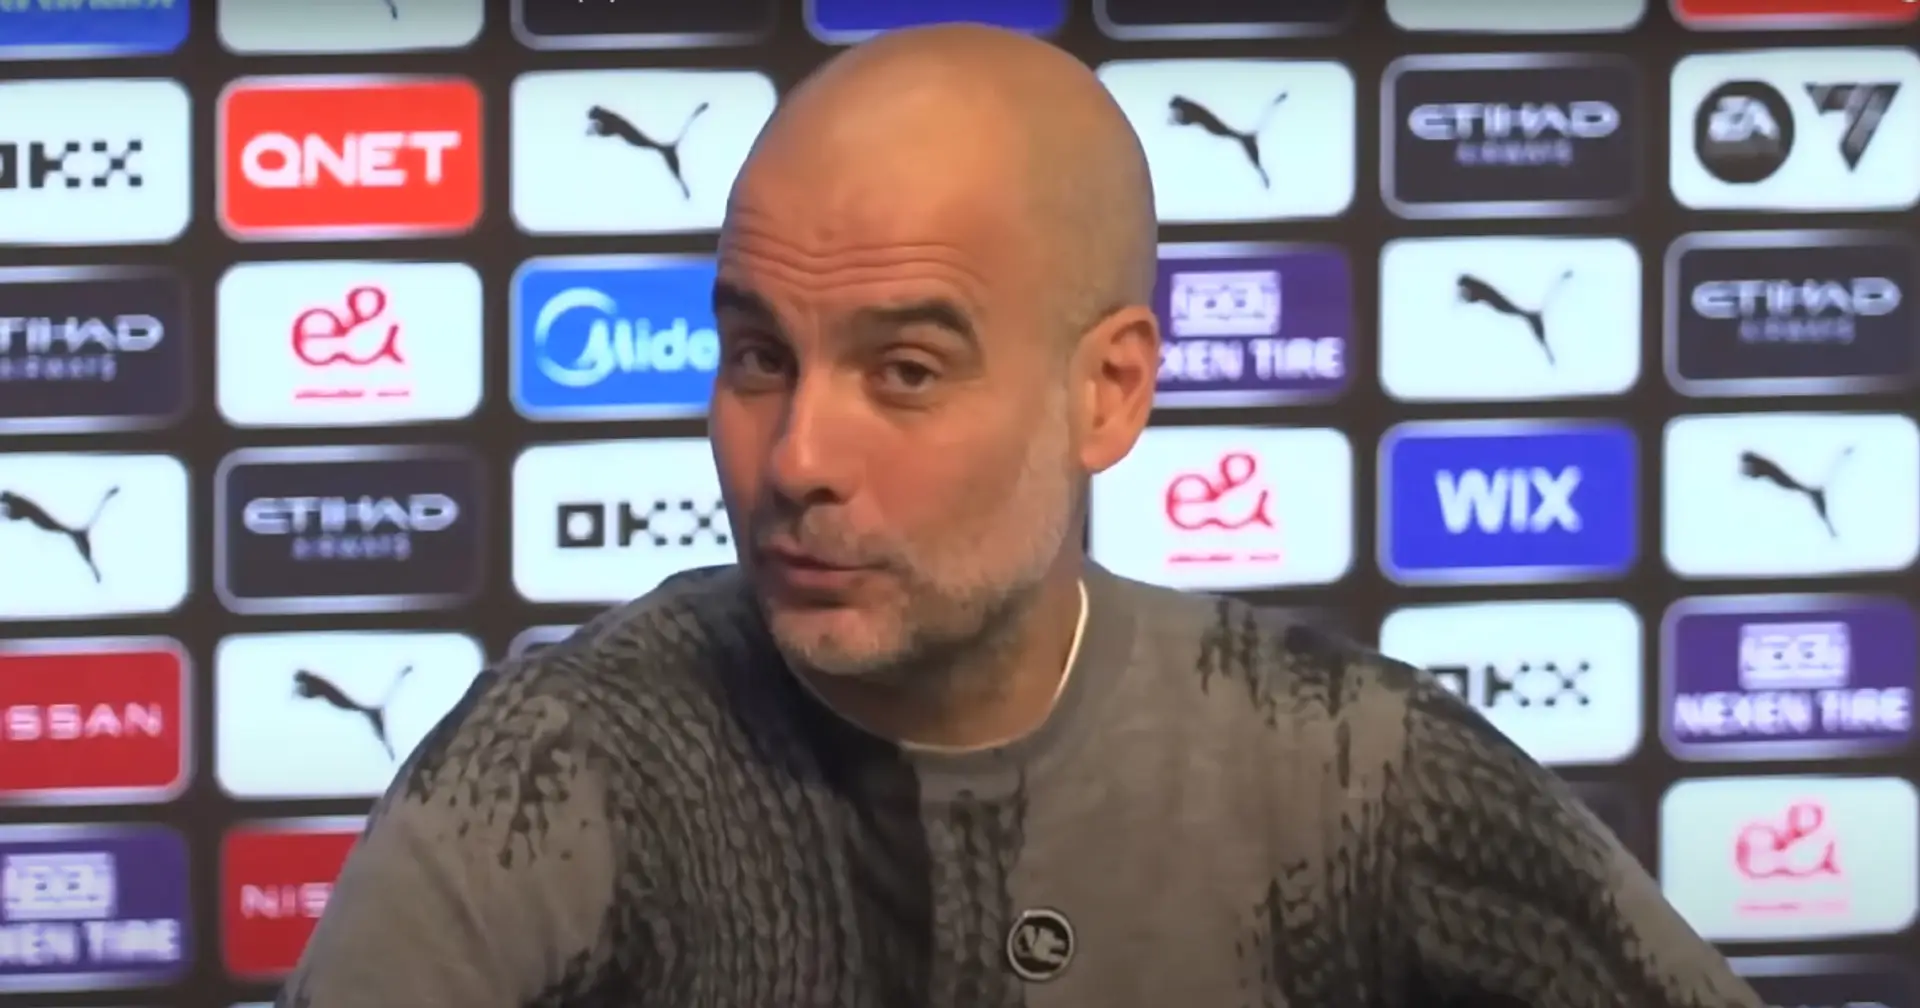 Pep Guardiola revealed the next Man City manager to players